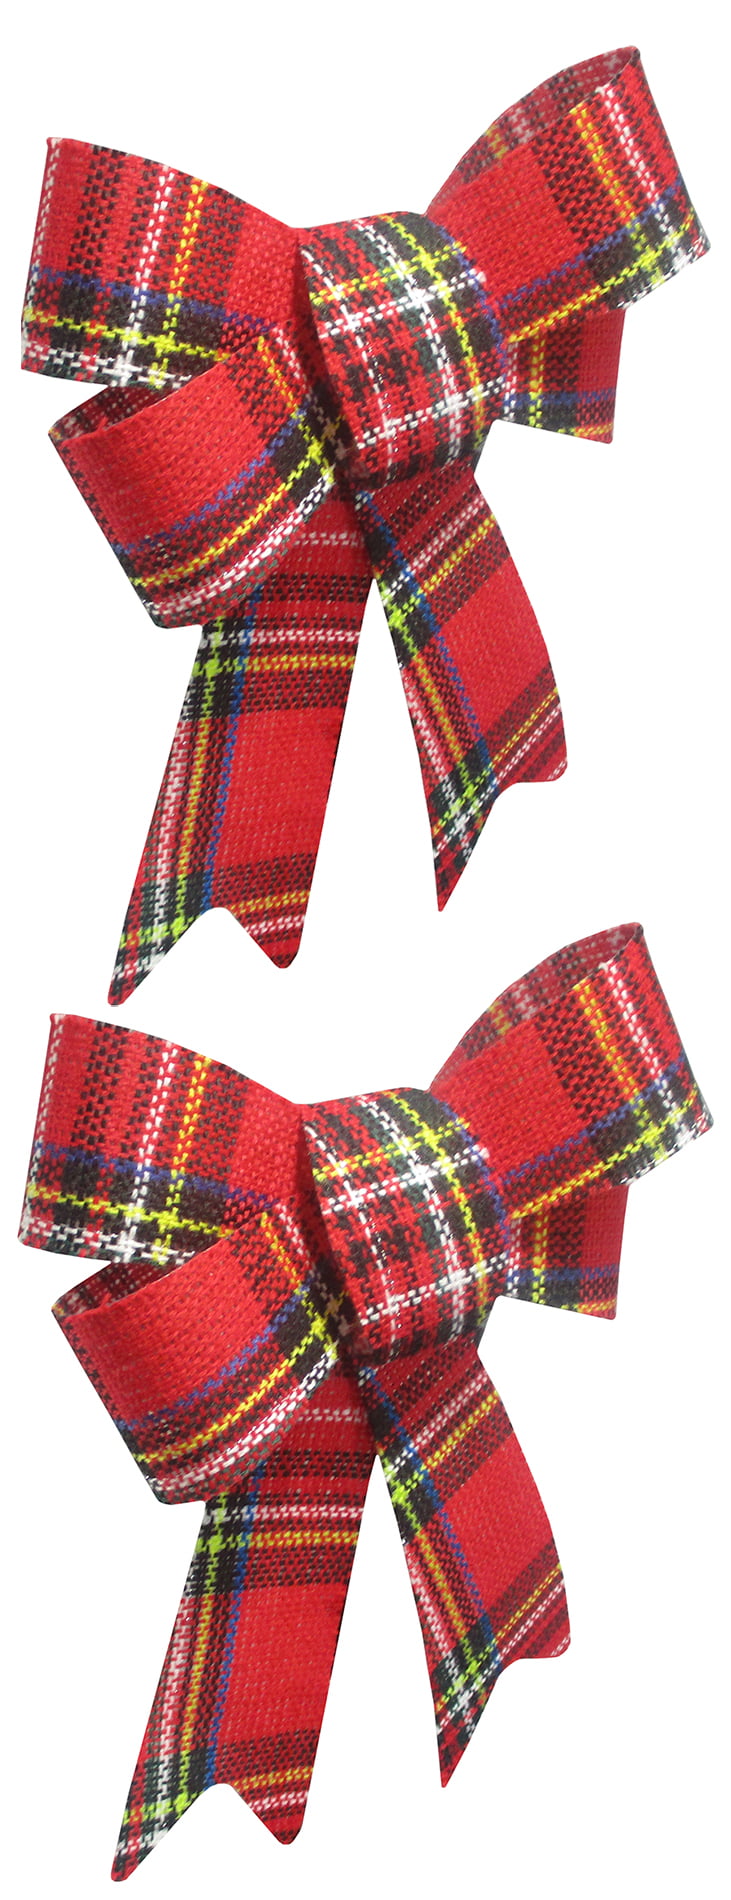 3 Pack Small Size Christmas Holiday Multi-color Plaid Bows Gift Wreath Decor 